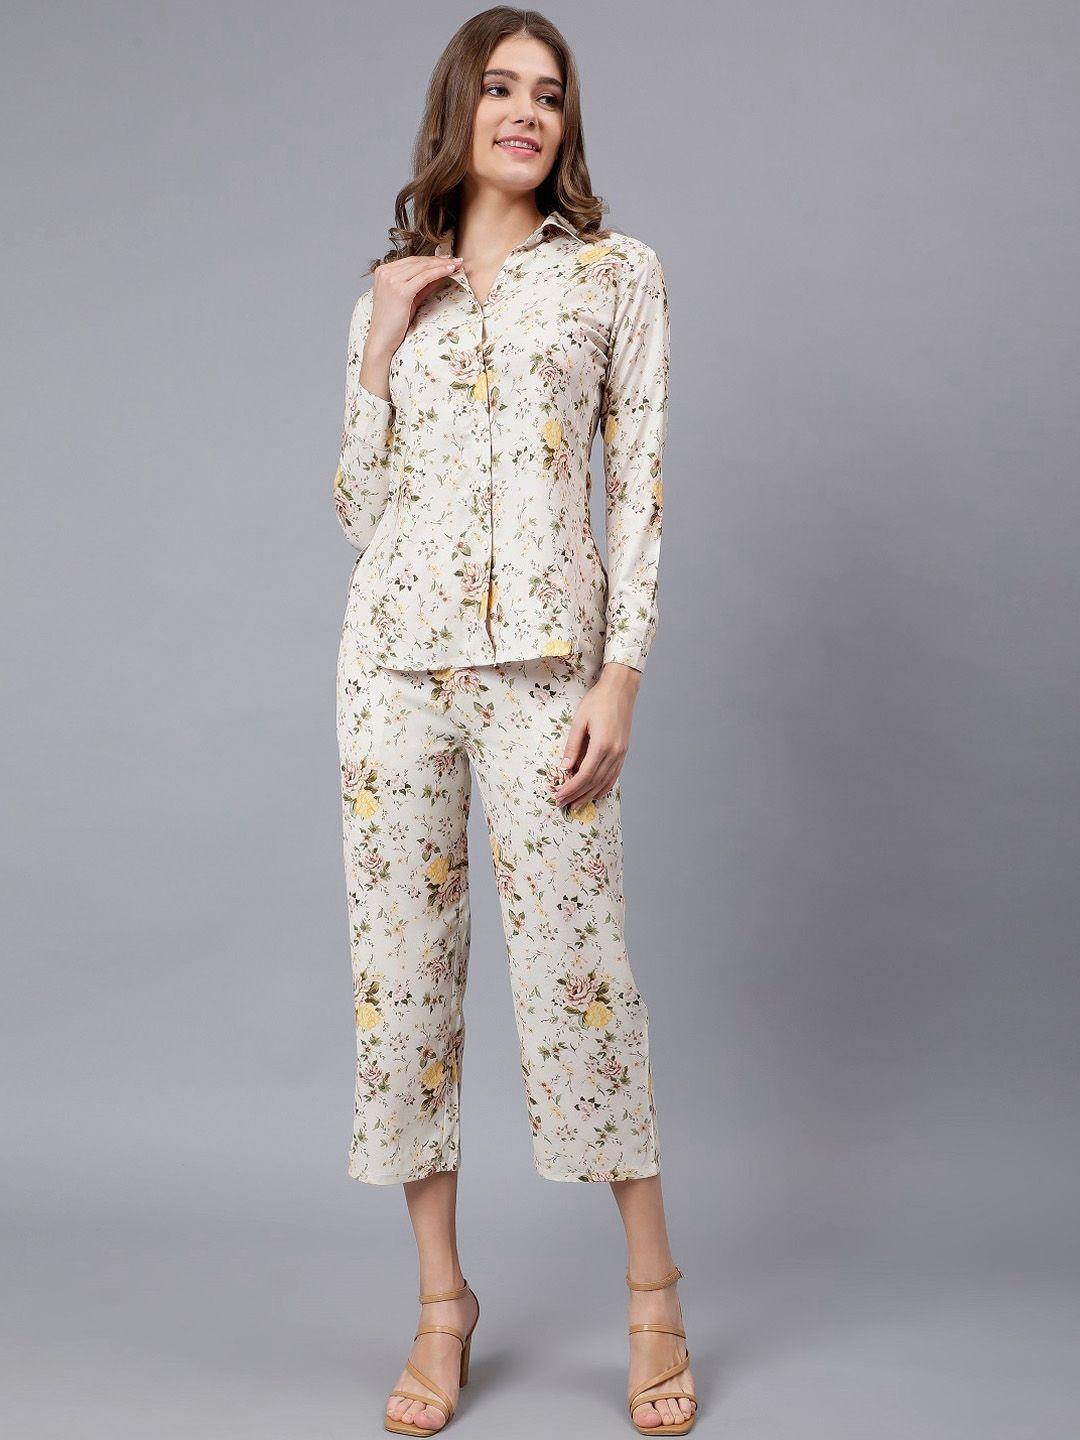 anvi be yourself cream-coloured floral printed shirt with trousers co-ords